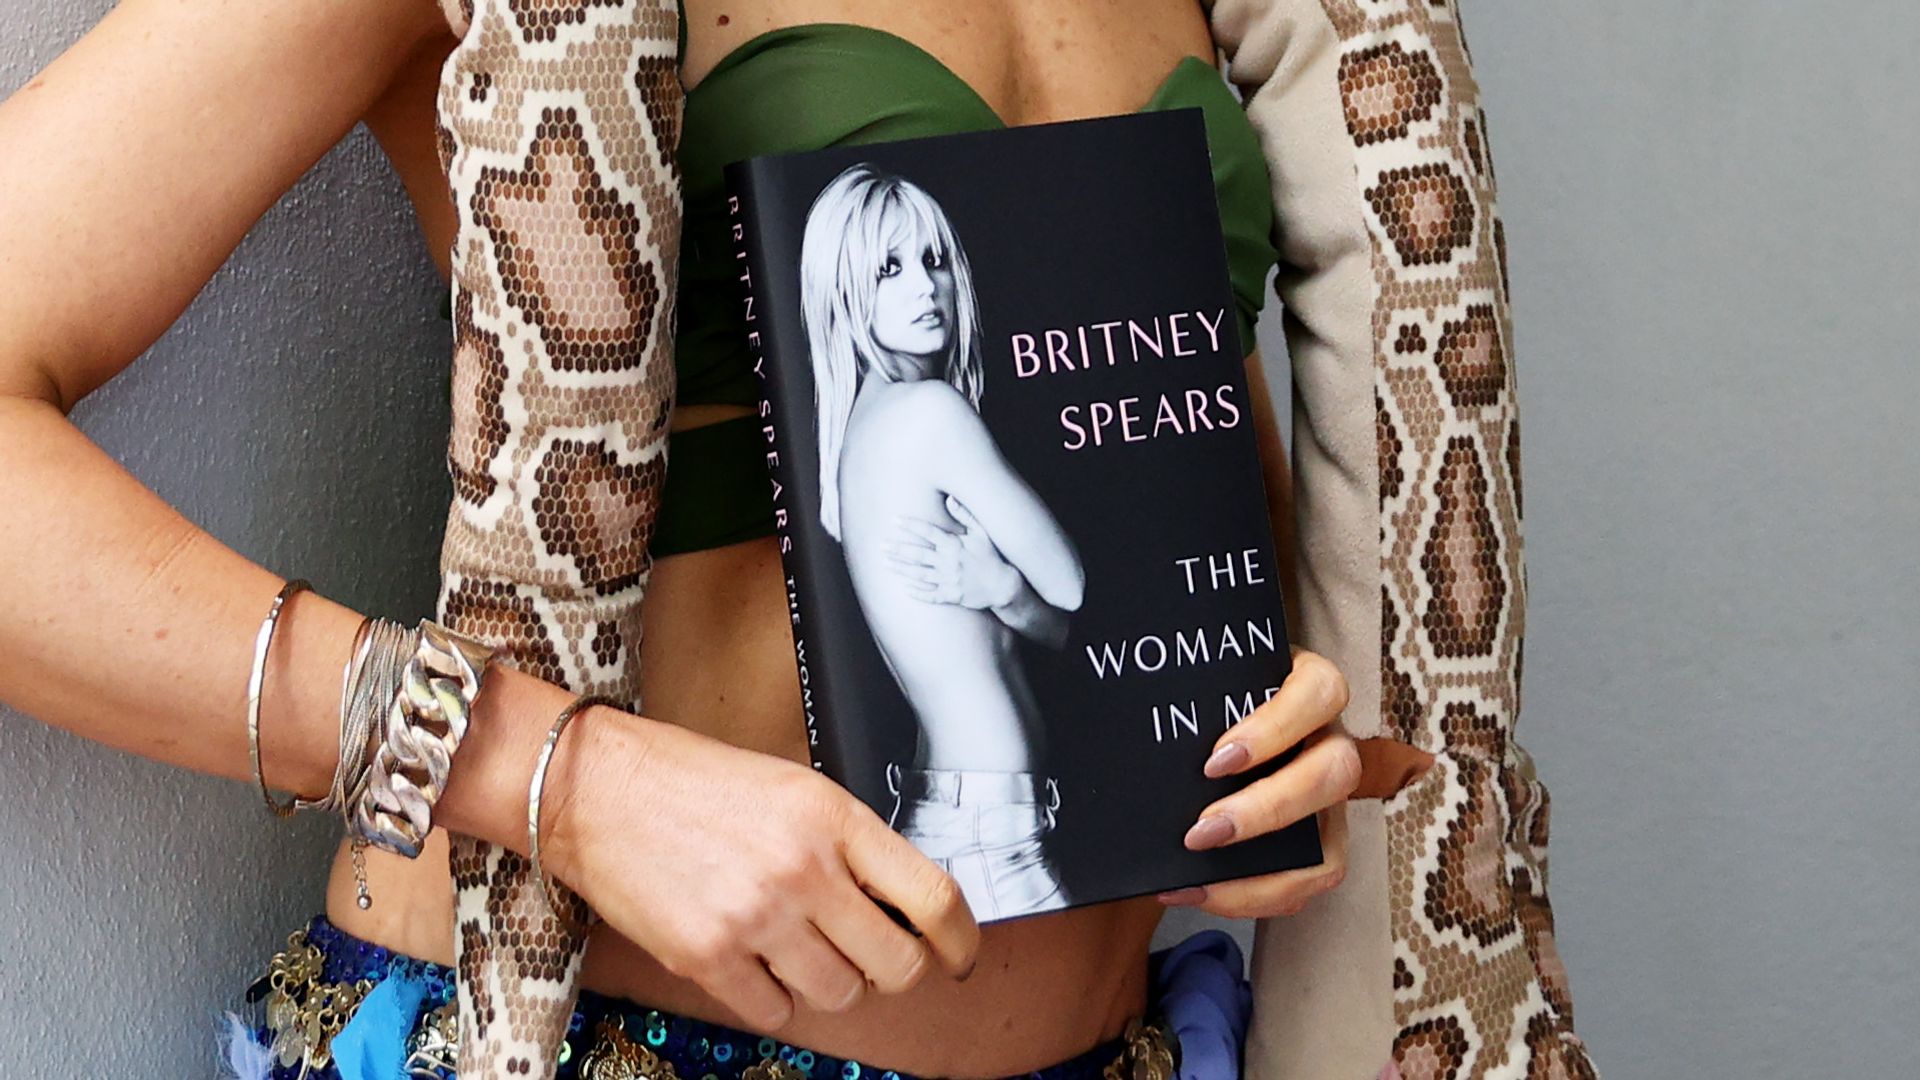 Britney Spears impersonator Sarah Brown poses with a copy of Britney's memoir 